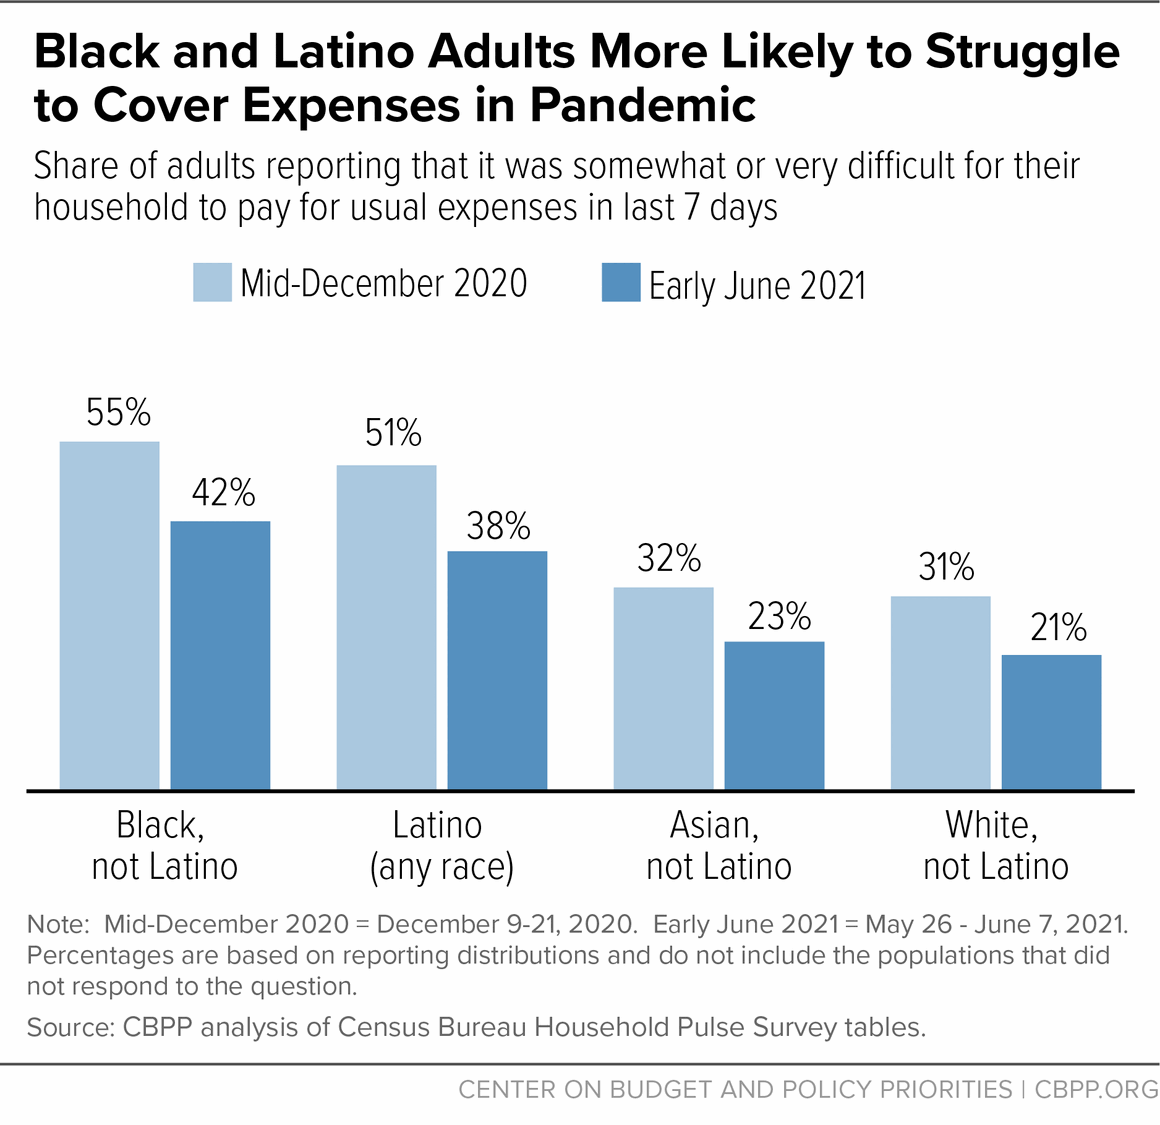 Black and Latino Adults More Likely to Struggle to Cover Expenses in Pandemic